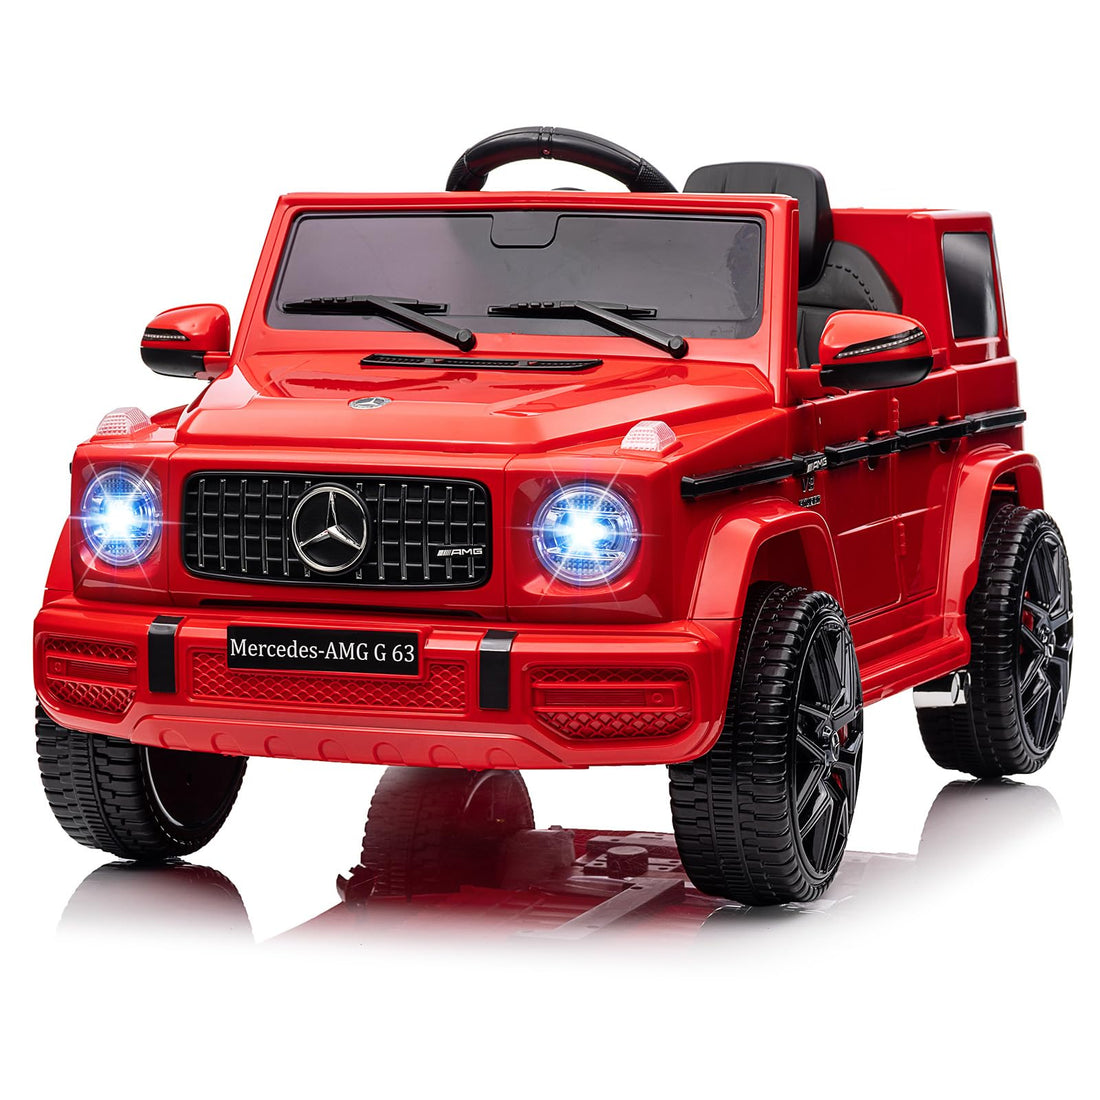 Kids 12V Ride on Car, Hetoy Licensed Mercedes Benz G63 Kids Car w/Remote Control, Wheels Suspension, Safety Lock, Soft Start, LED Light, Bluetooth, Music Battery Powered Electric Car for Kids, Red